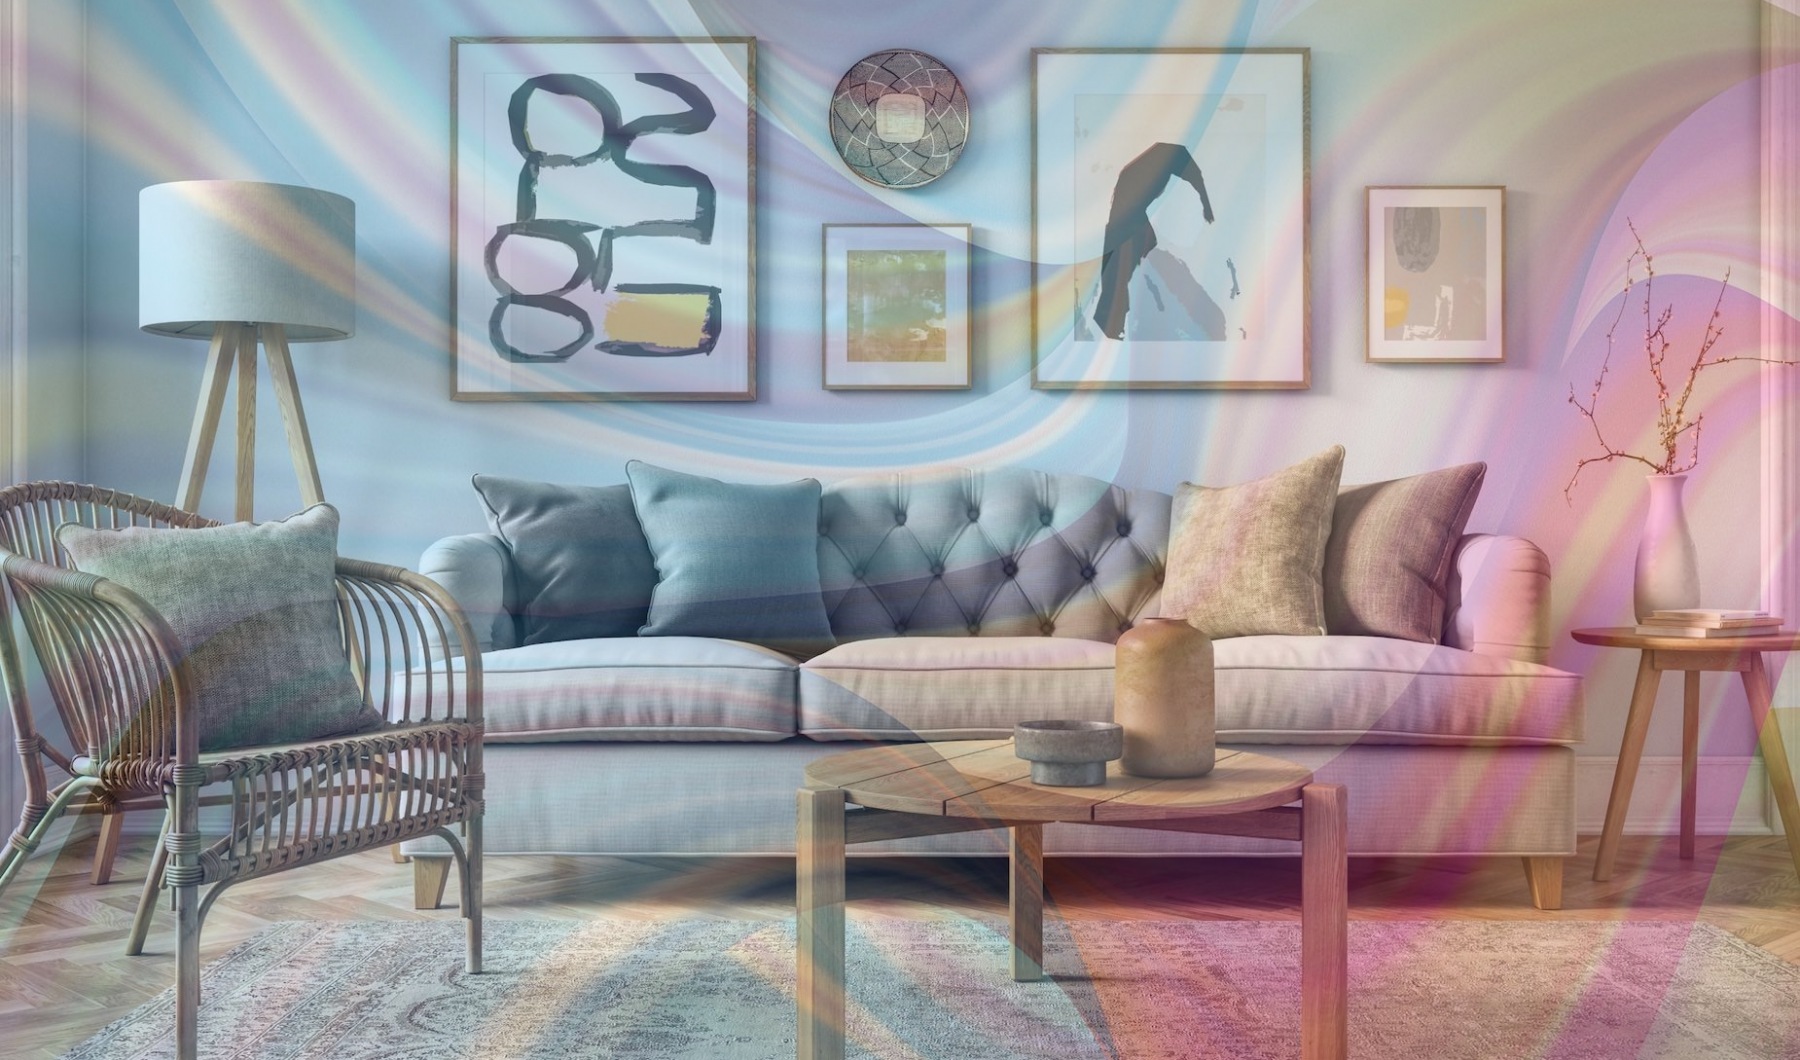 wide view of living room with colorful overlays